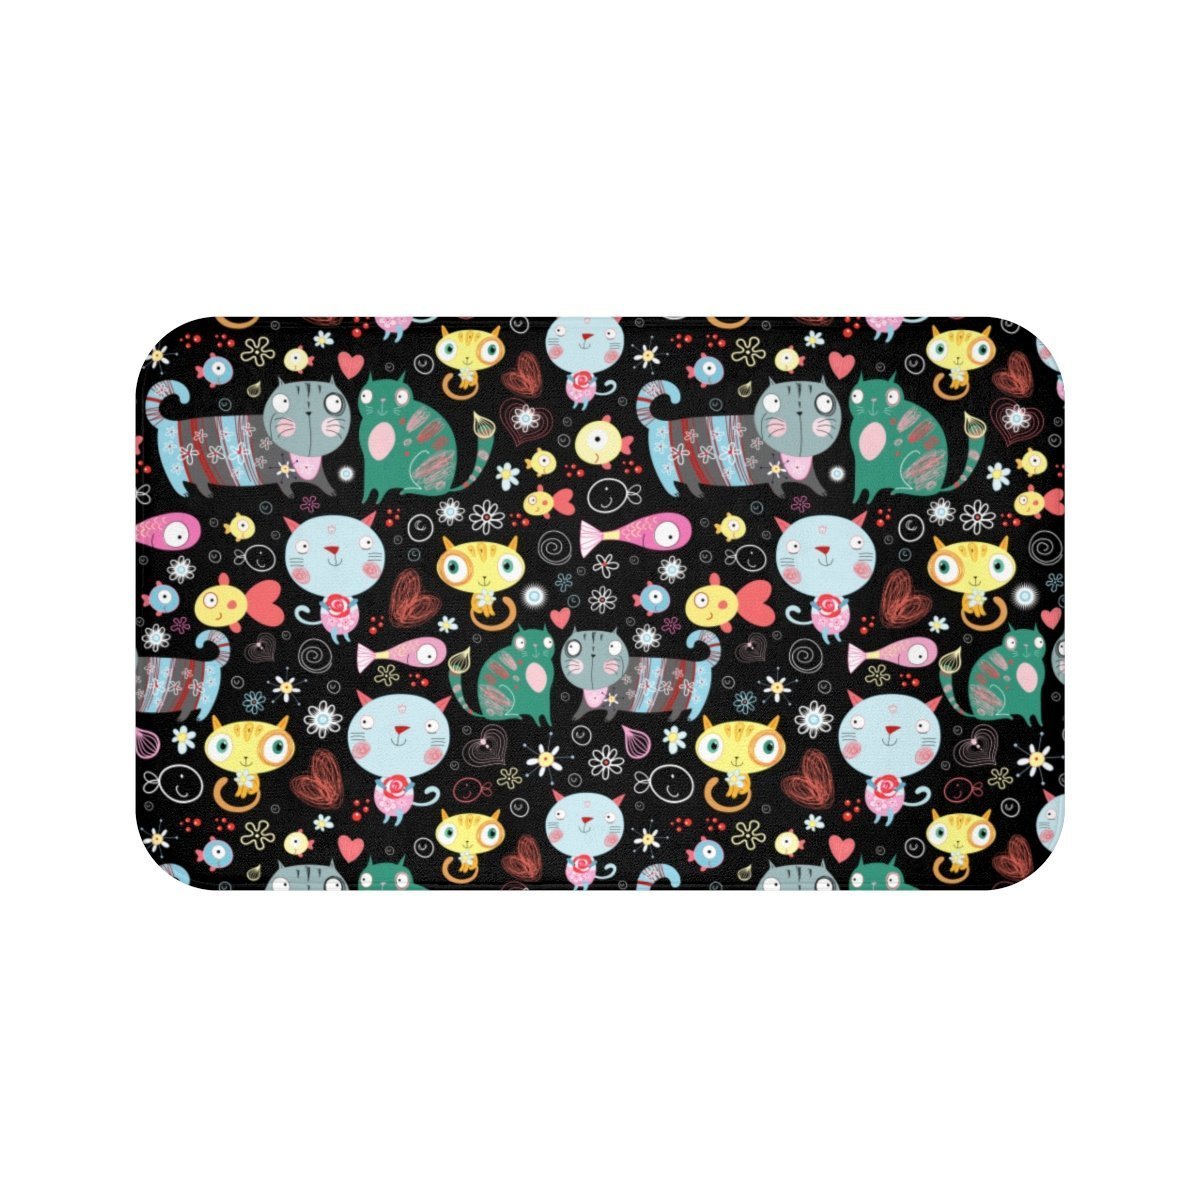 Refresh your cute home decor collection with this adorable abstract cat bath mat featuring a vibrant print on a black background.